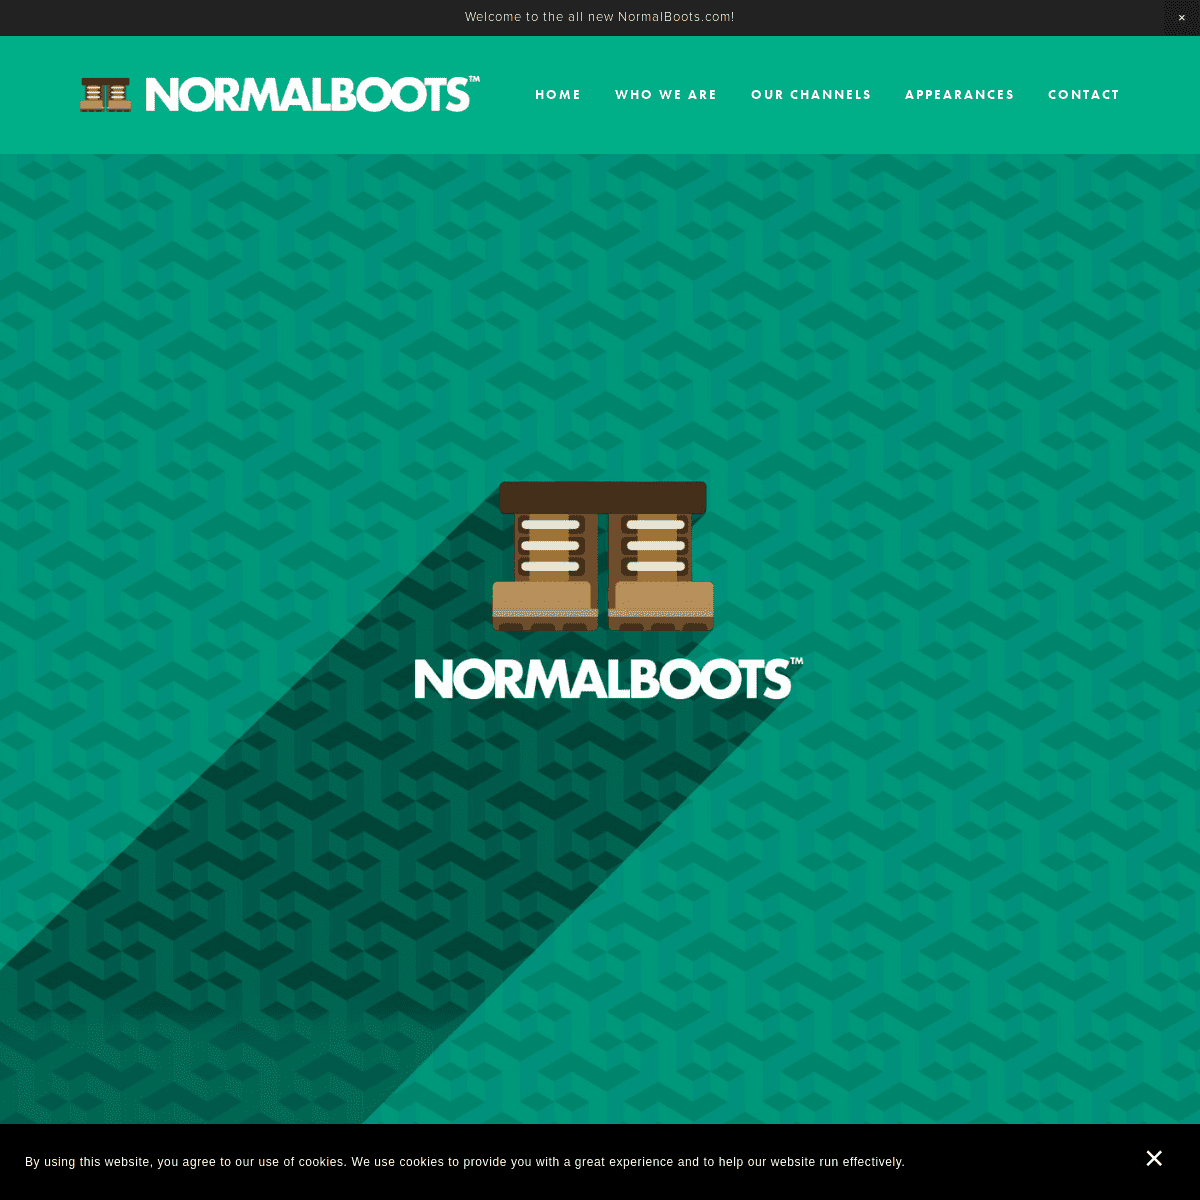 A complete backup of normalboots.com